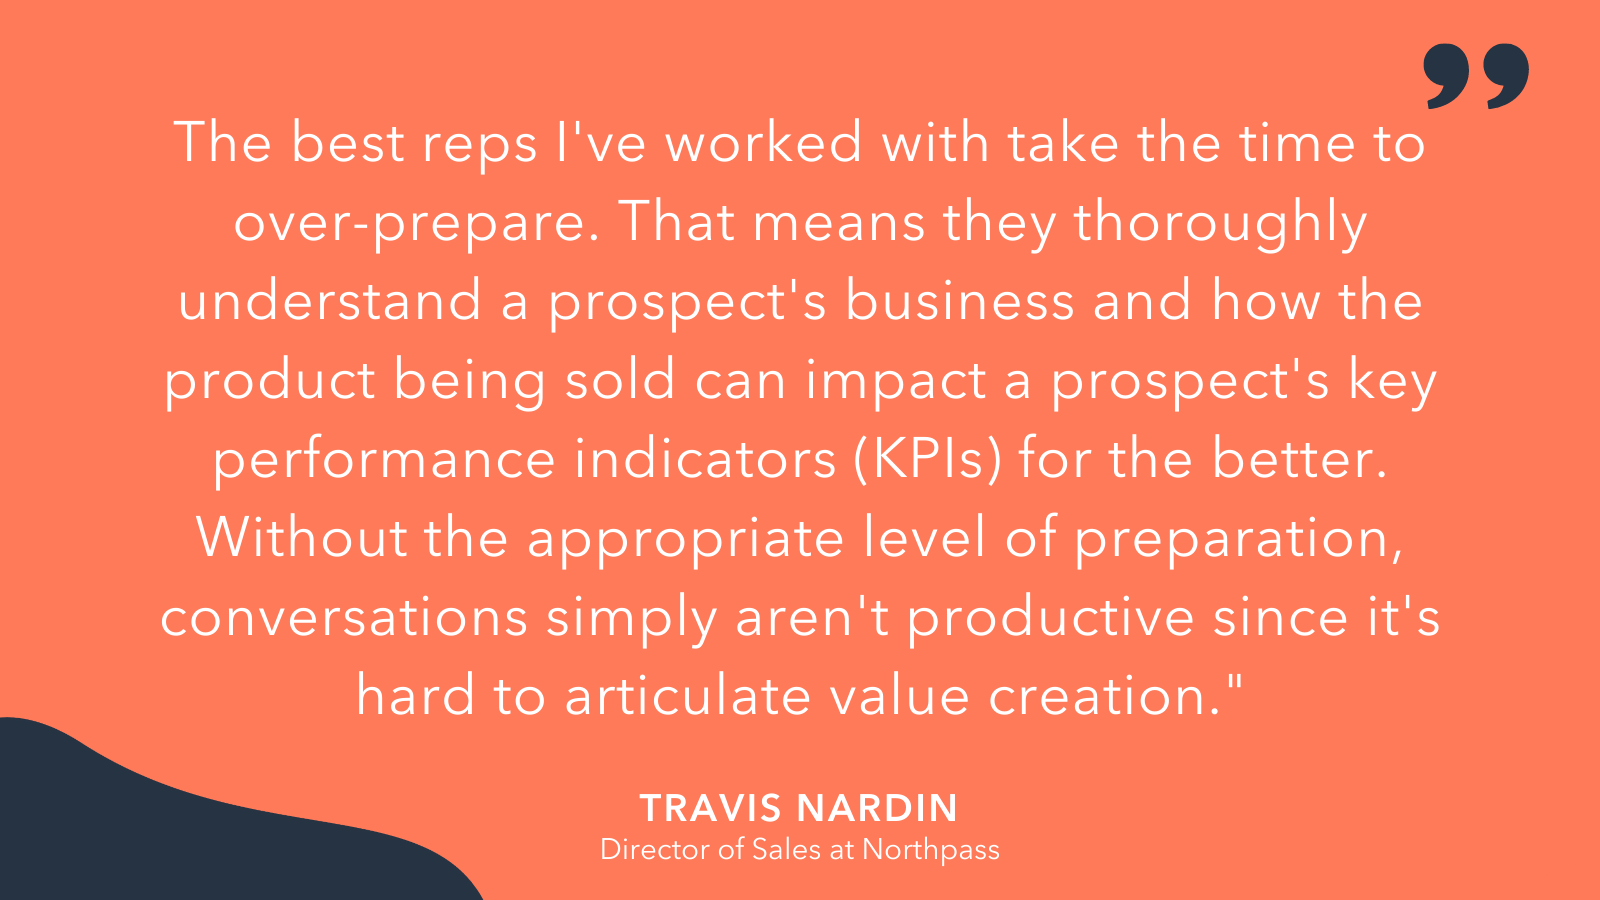 sales excellence according to travis nardin